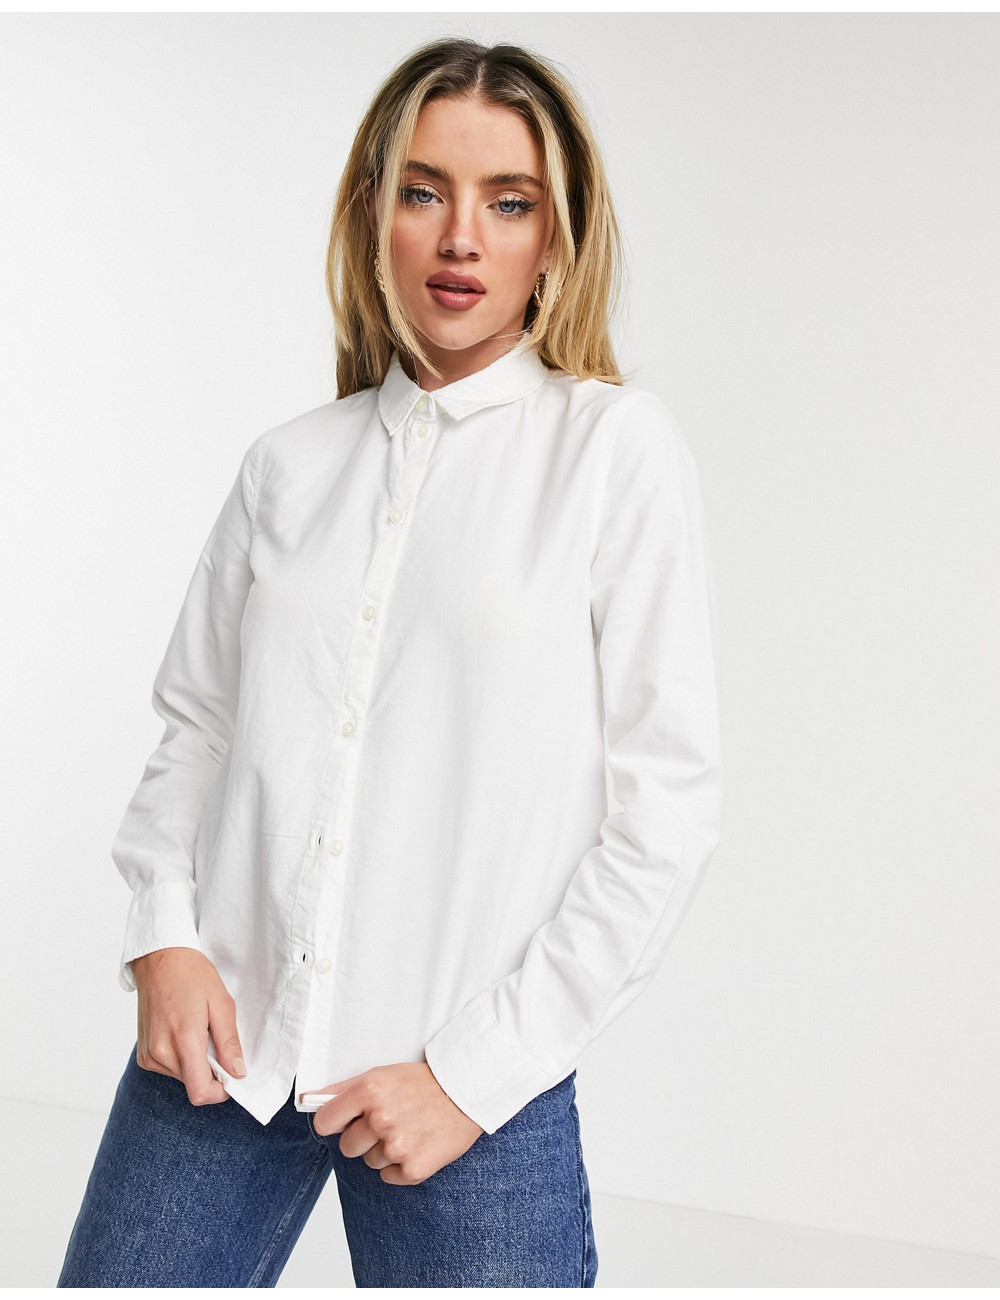 Pieces oxford shirt in white